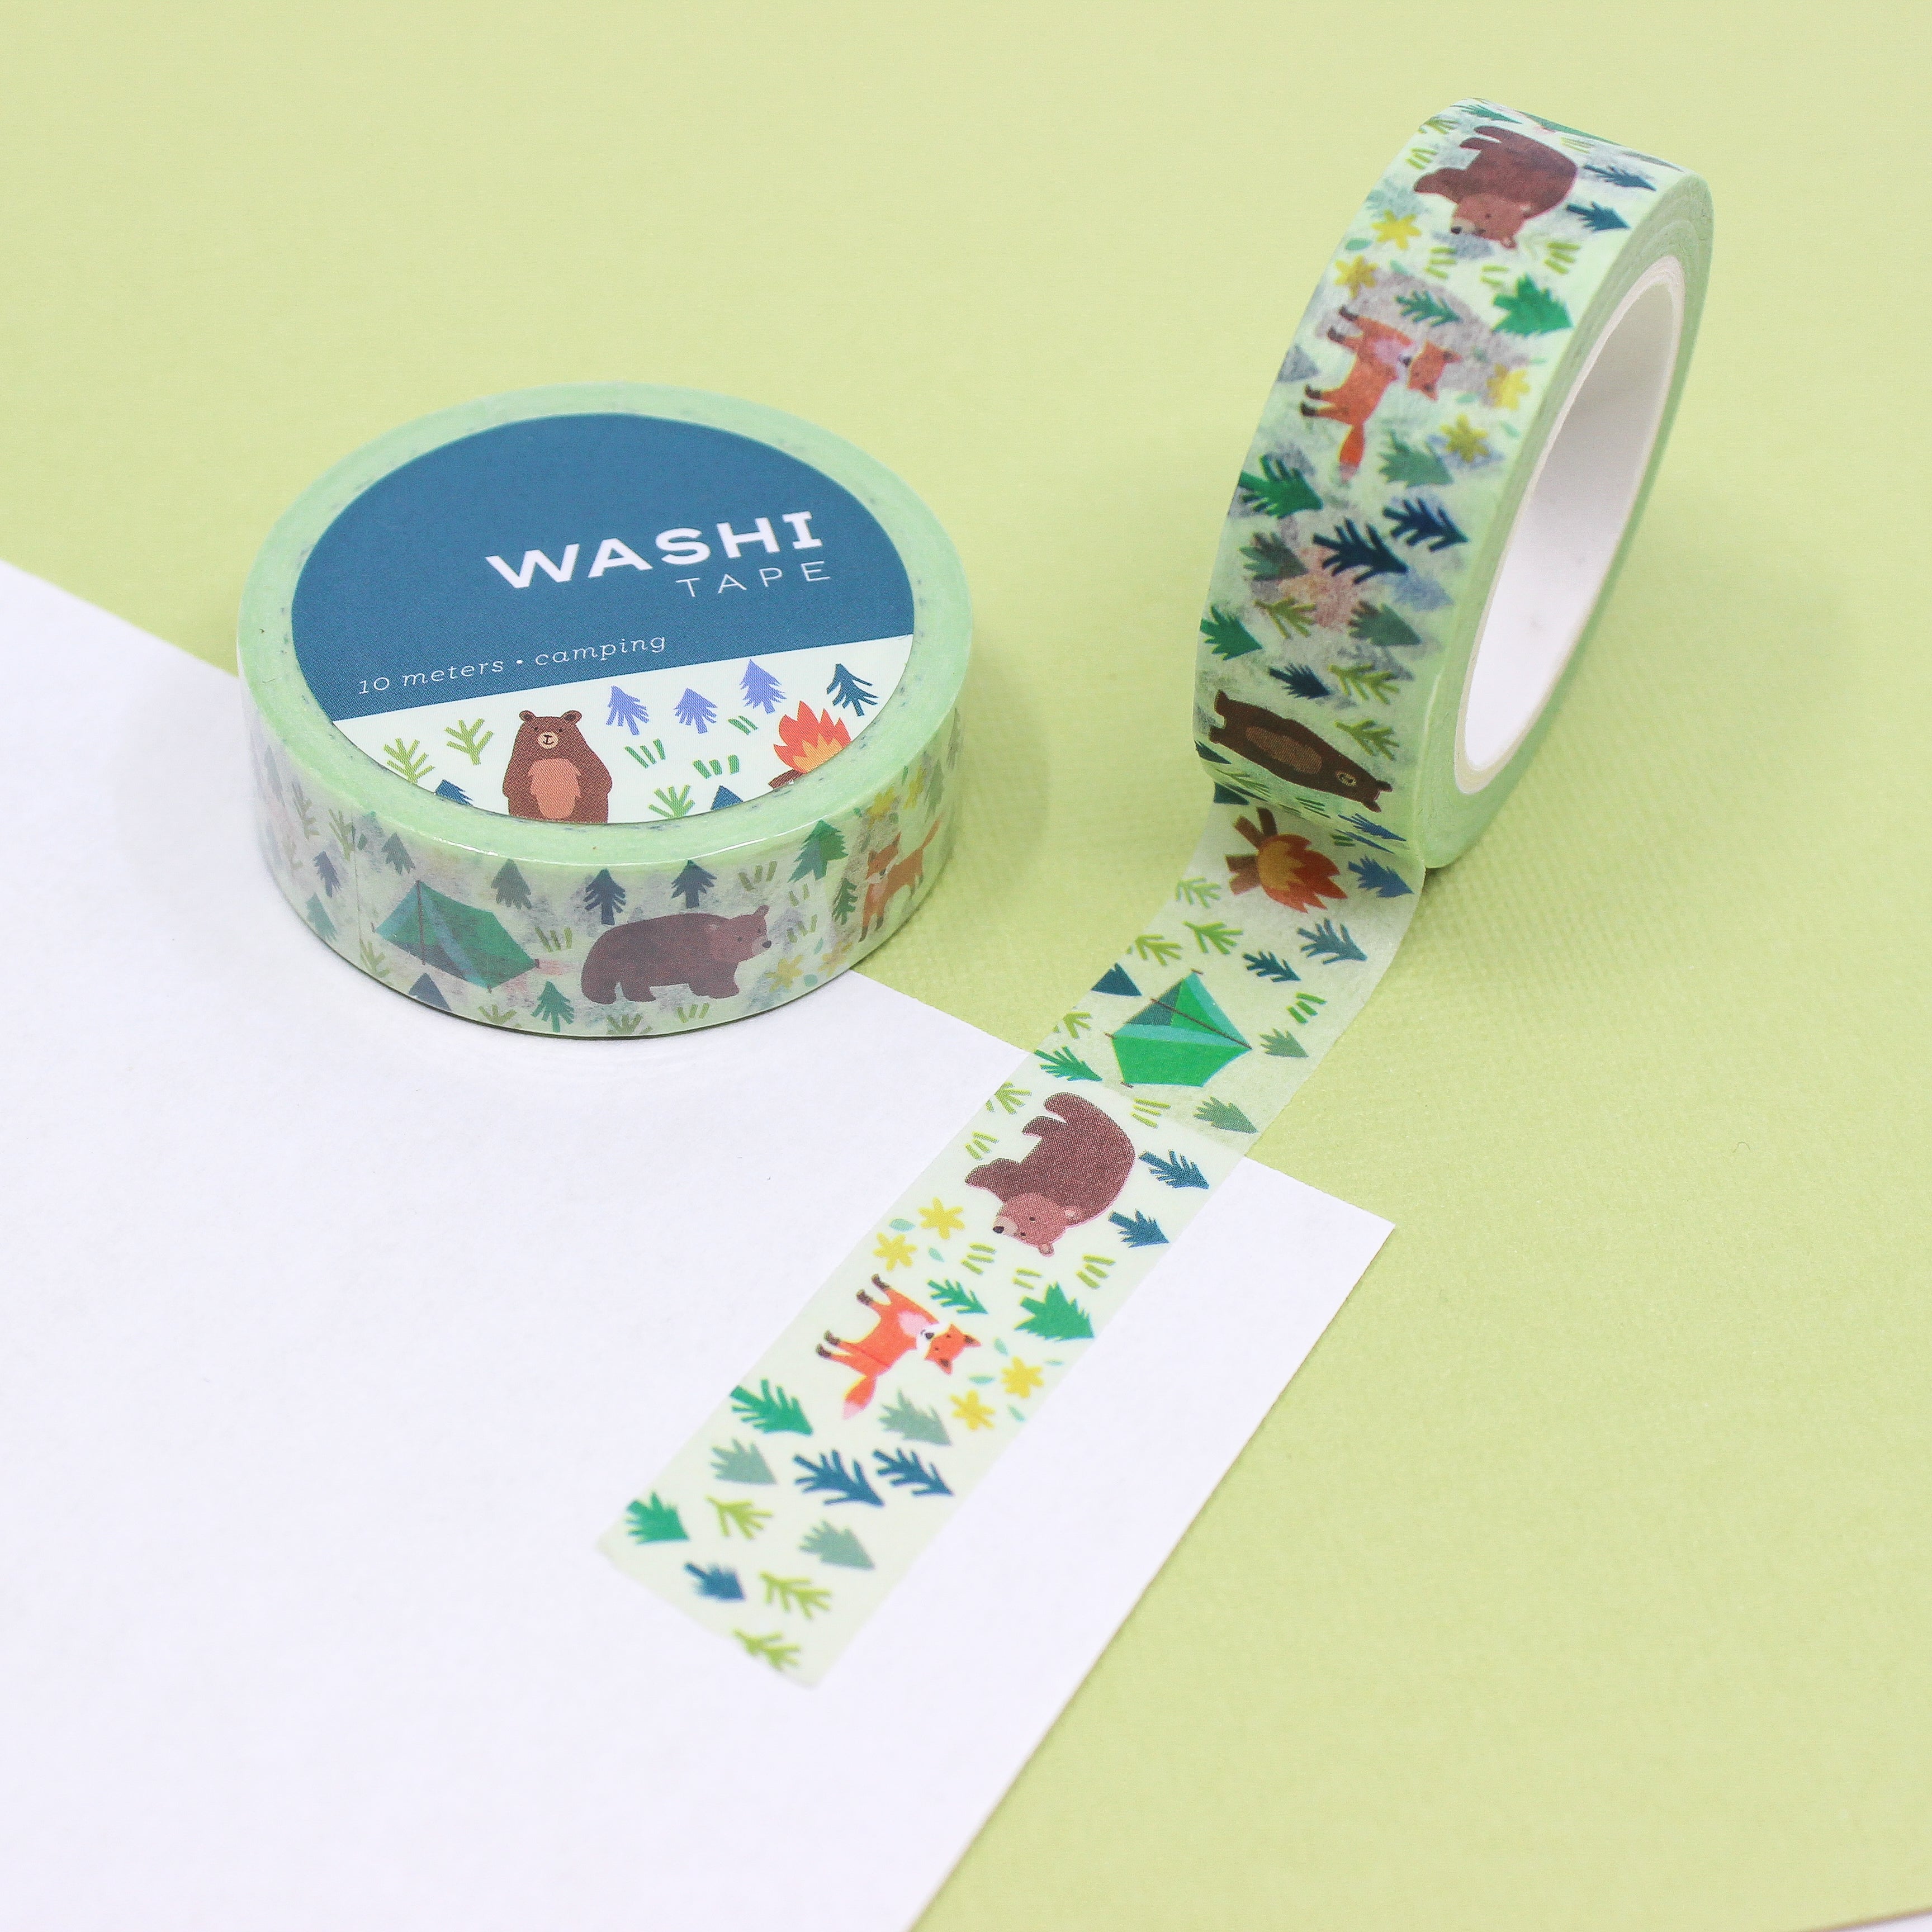 This is a green camping site with wild animals themed washi tape from BBB Supplies Craft Shop